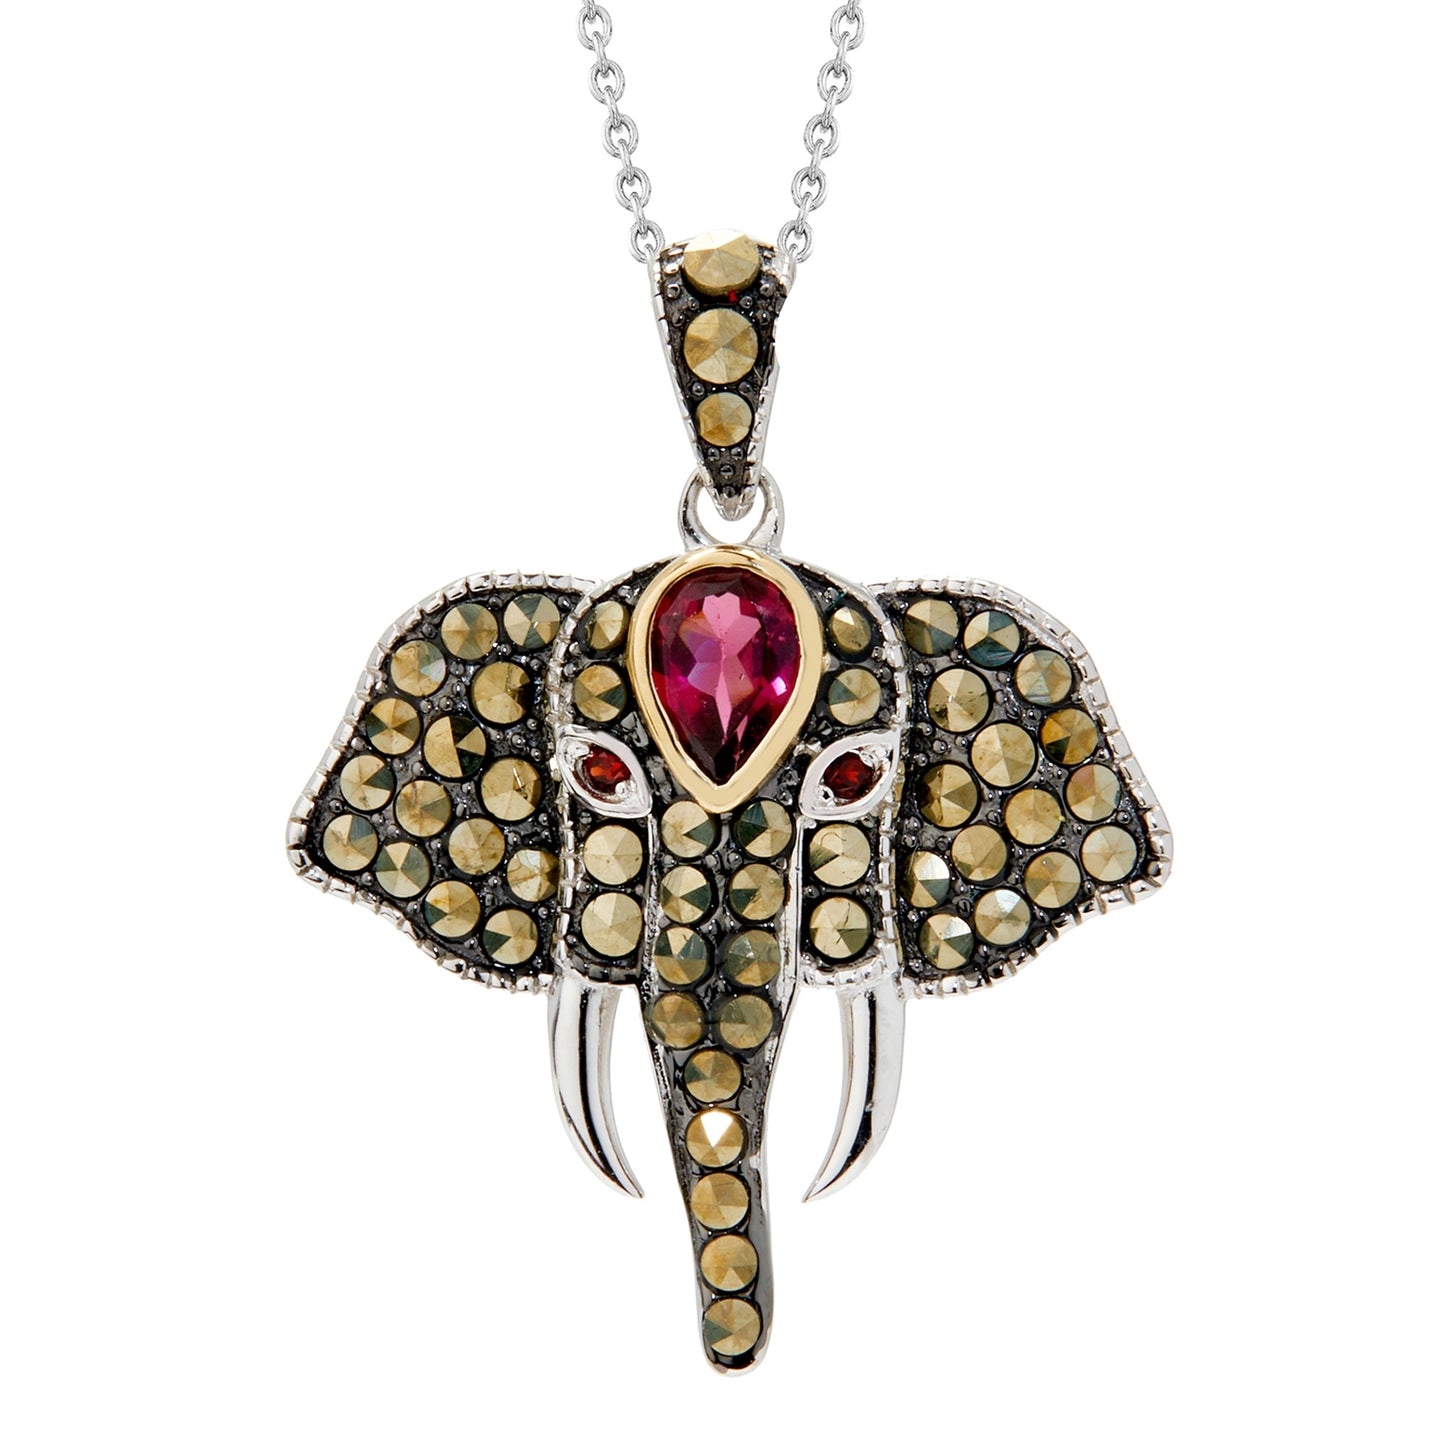 14K Gold & Sterling Silver with Rhodolite, Marcasite Pendant - Pinctore